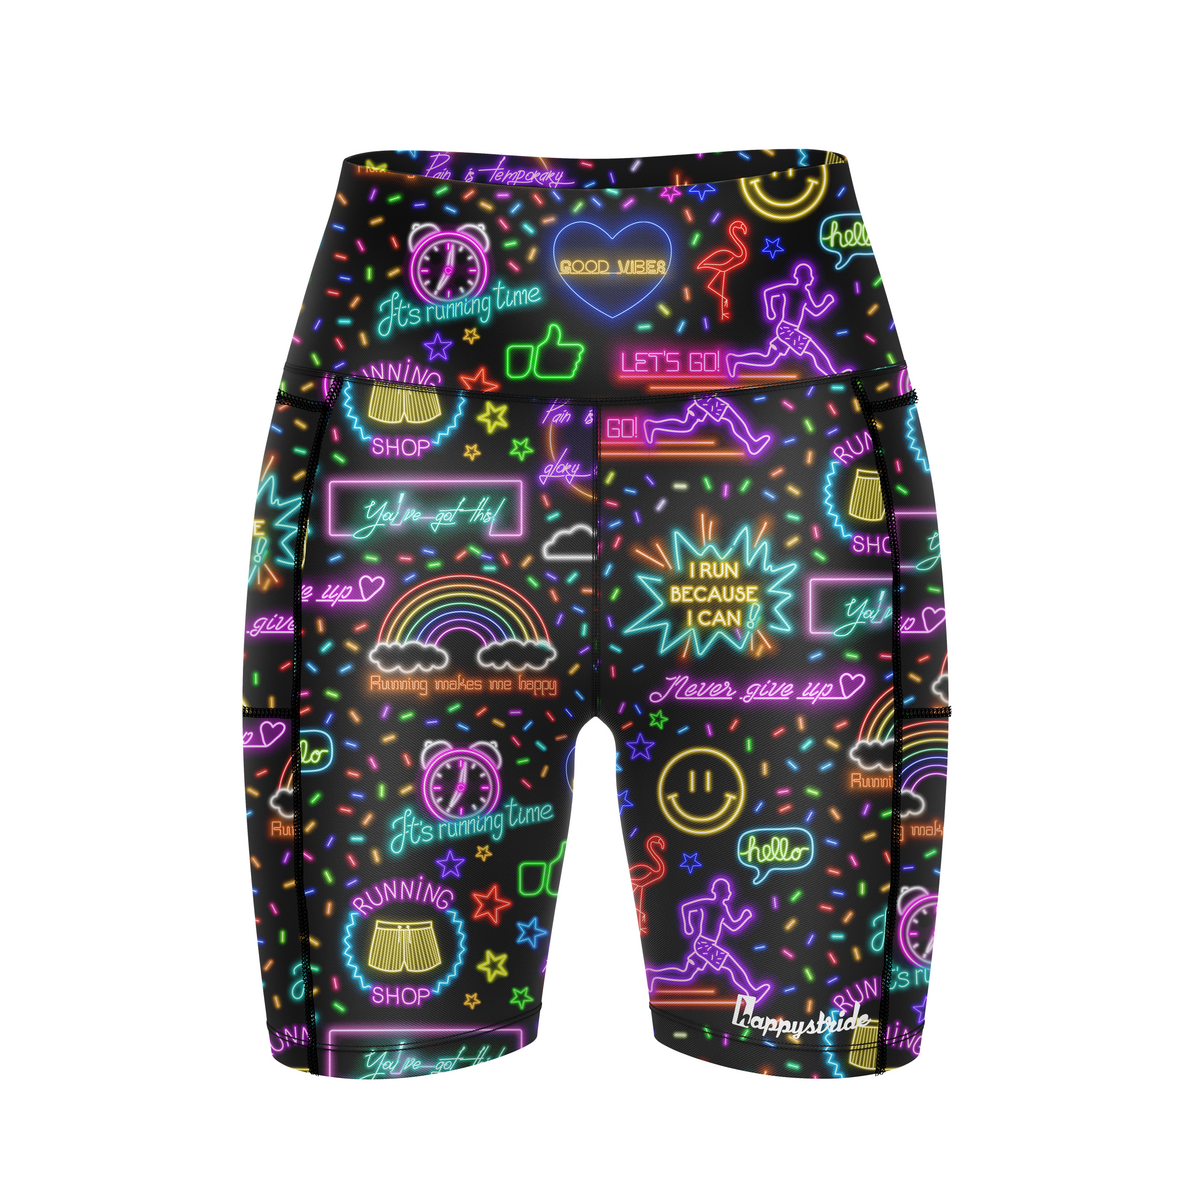 Glow & go'' cool colourful fun bright running & fitness shorts